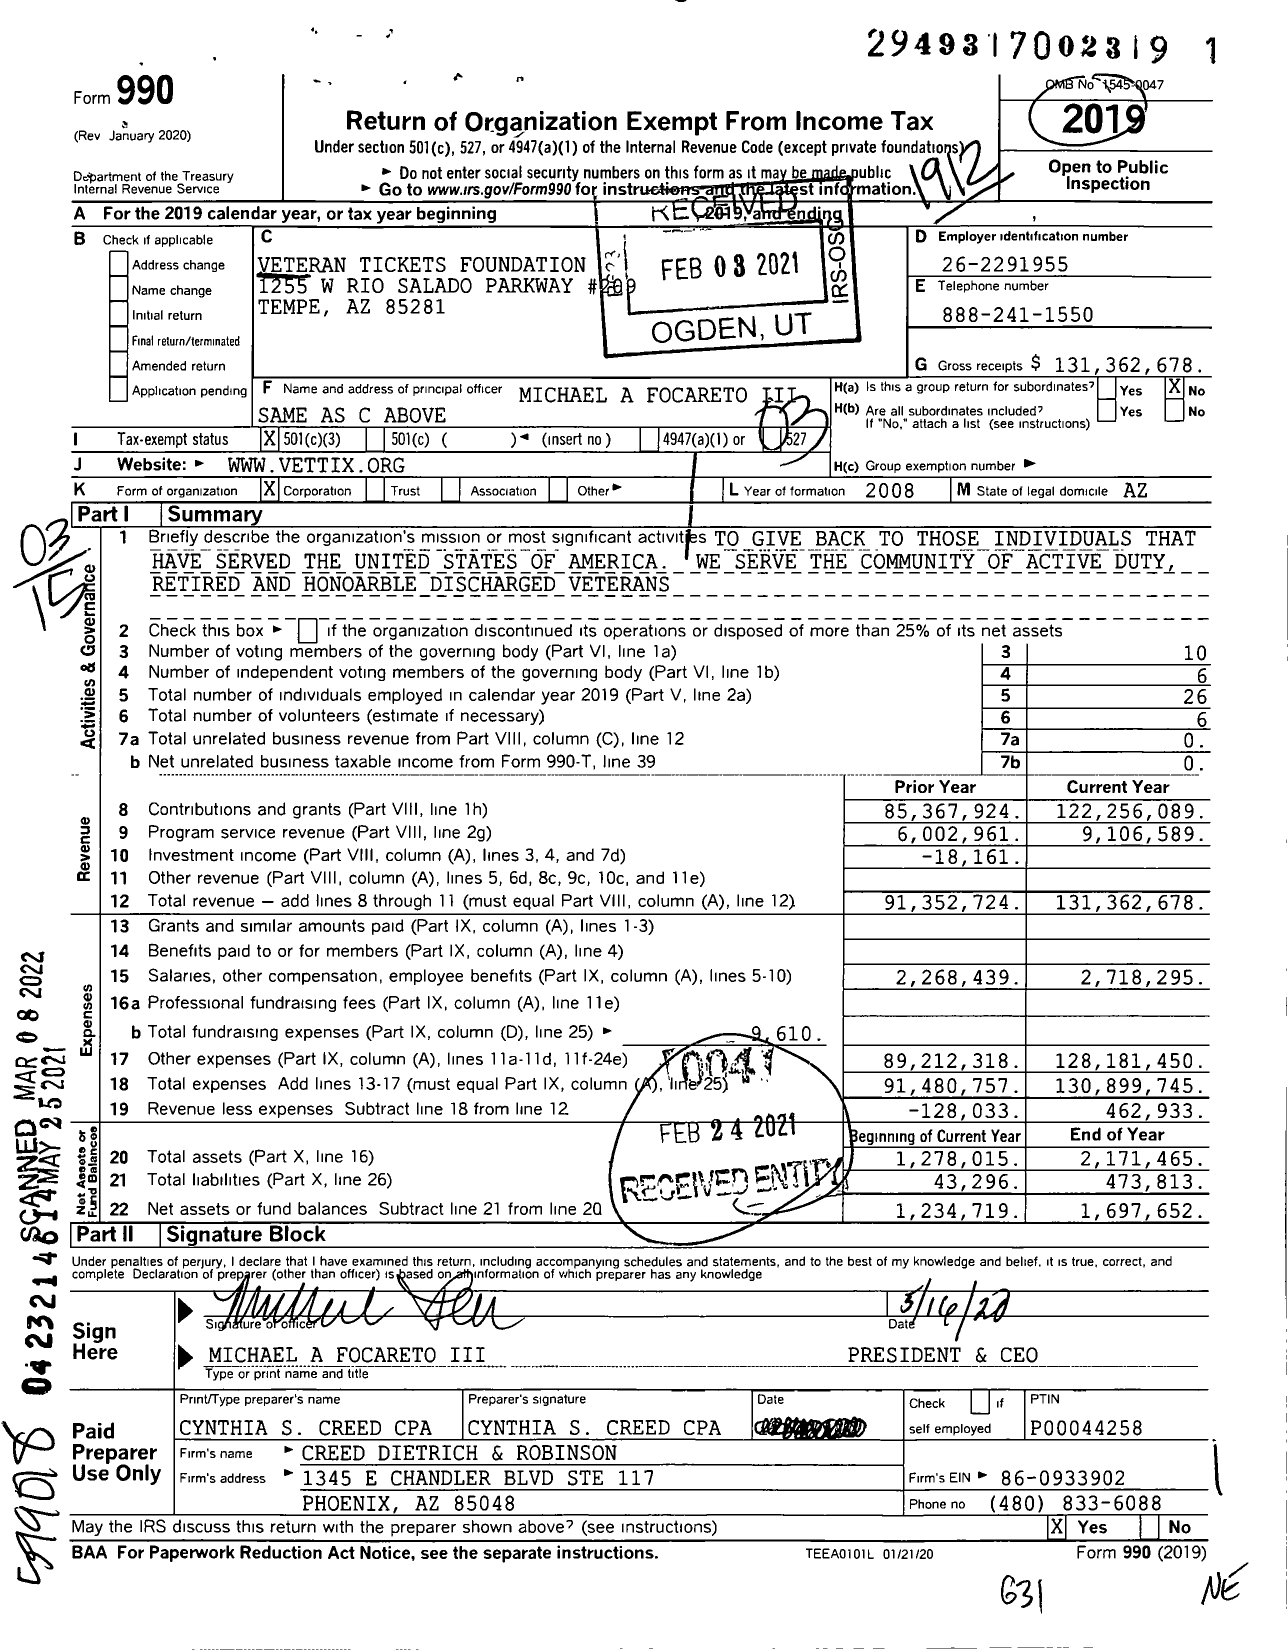 Image of first page of 2019 Form 990 for Veteran Tickets Foundation (VTF)